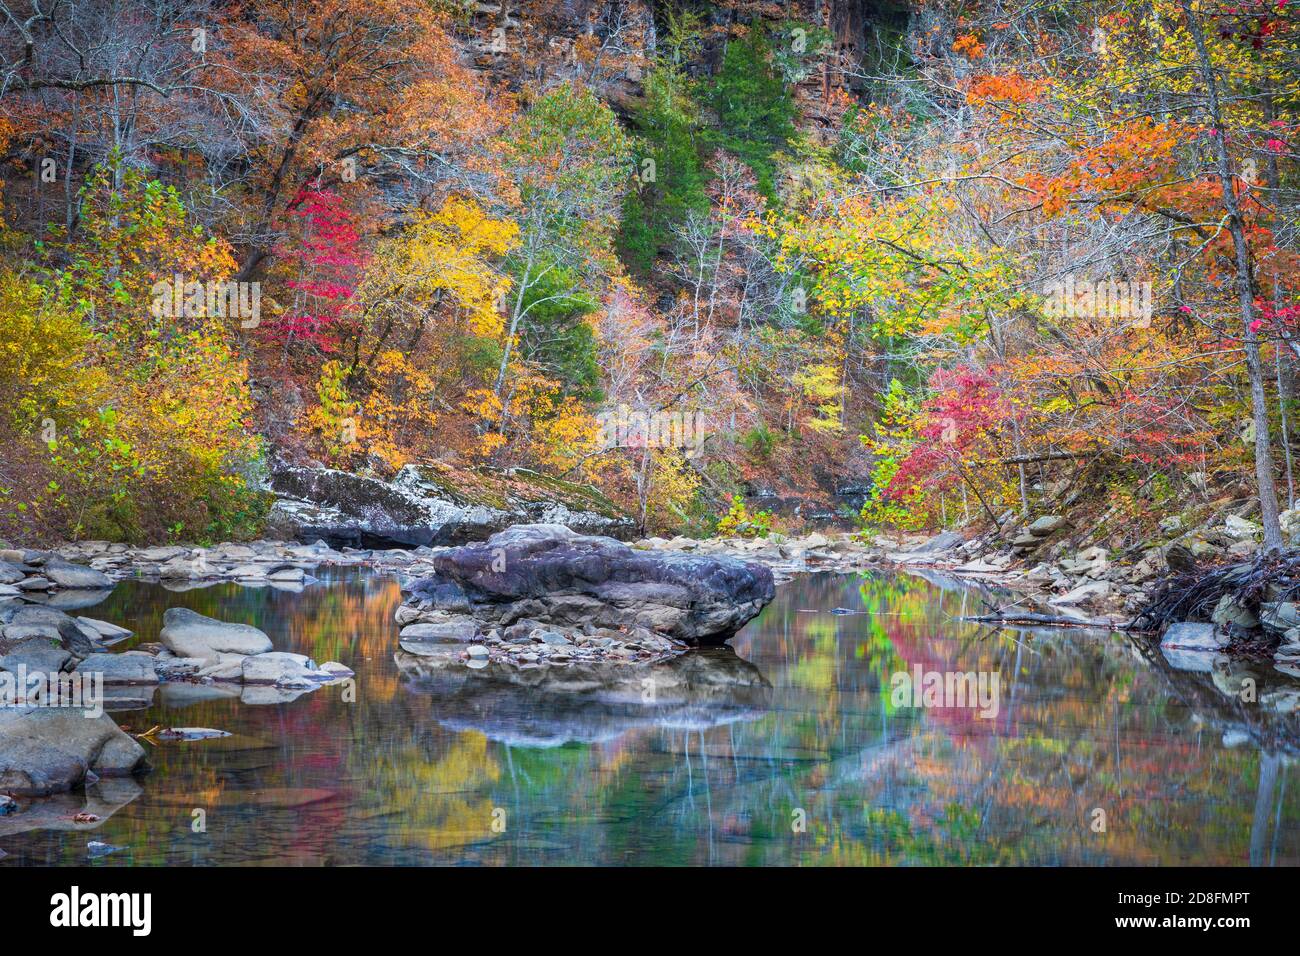 Boulders and fall color along Falling Water Creek in the Arkansas Ozark National Forest area. Stock Photo